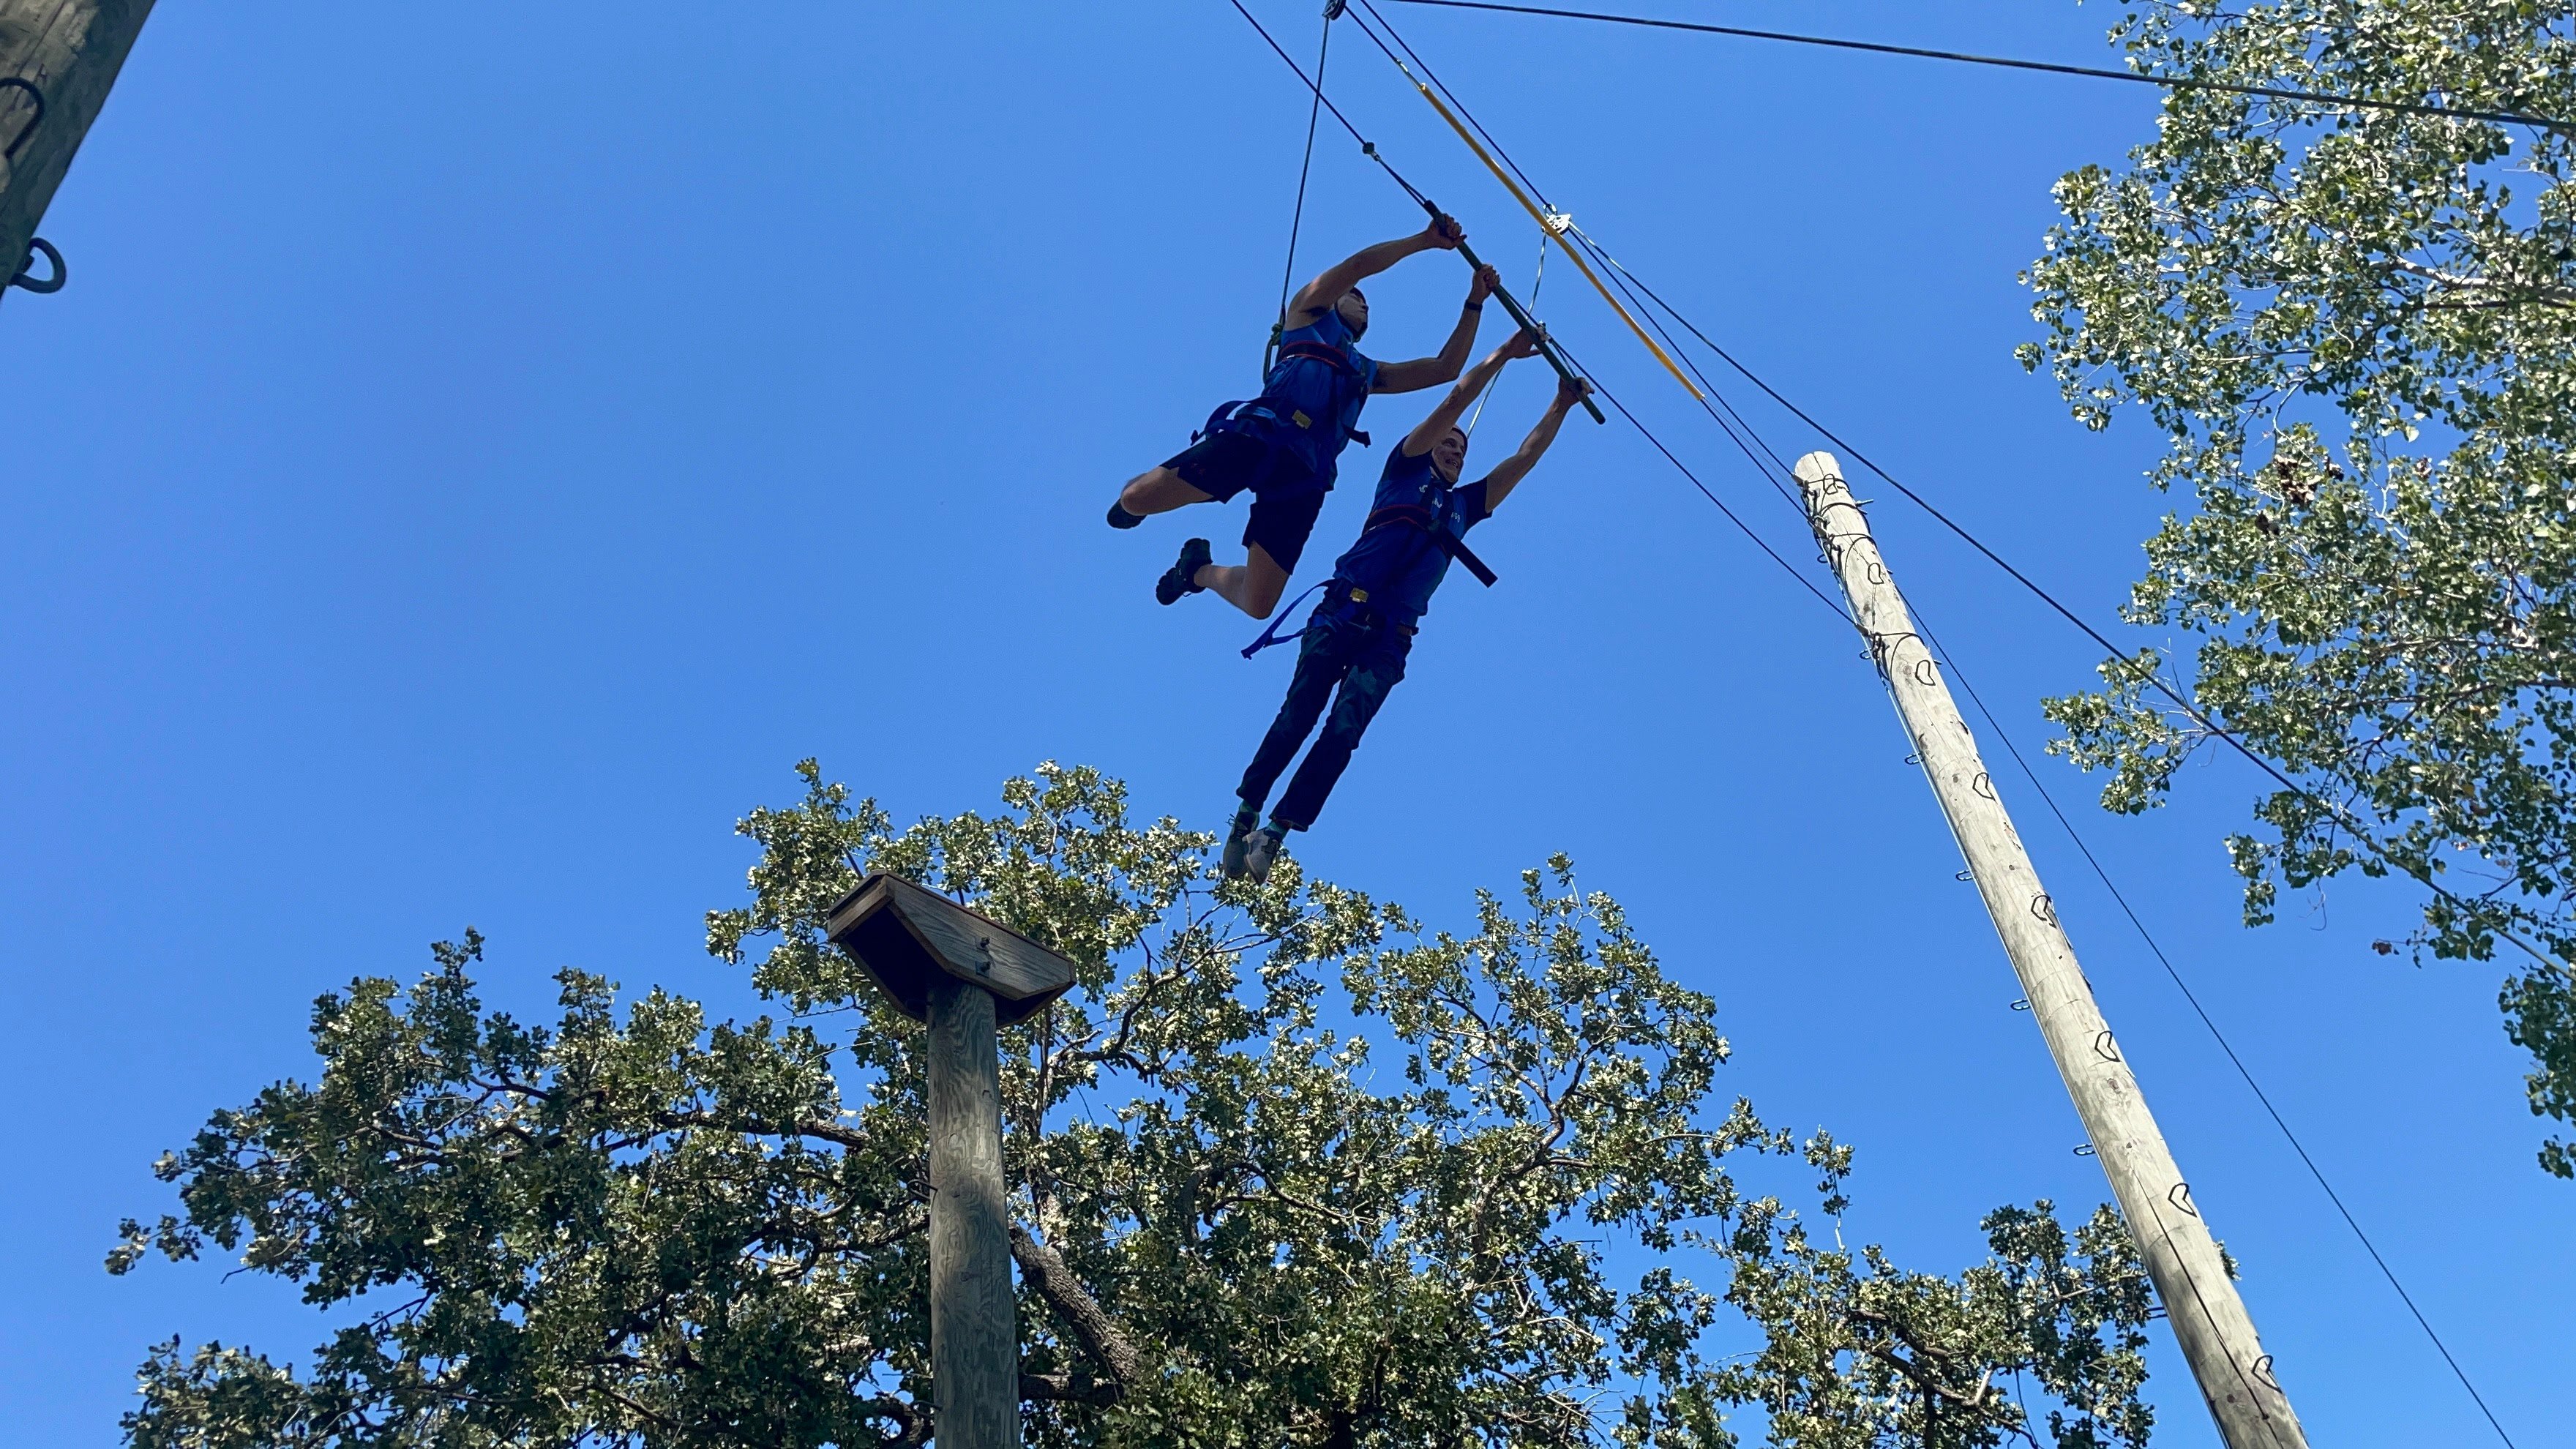 Co-Founders George and James at the Baylor University Challenge Course jumping from a telephone pole and grabbing onto a trapeze bar